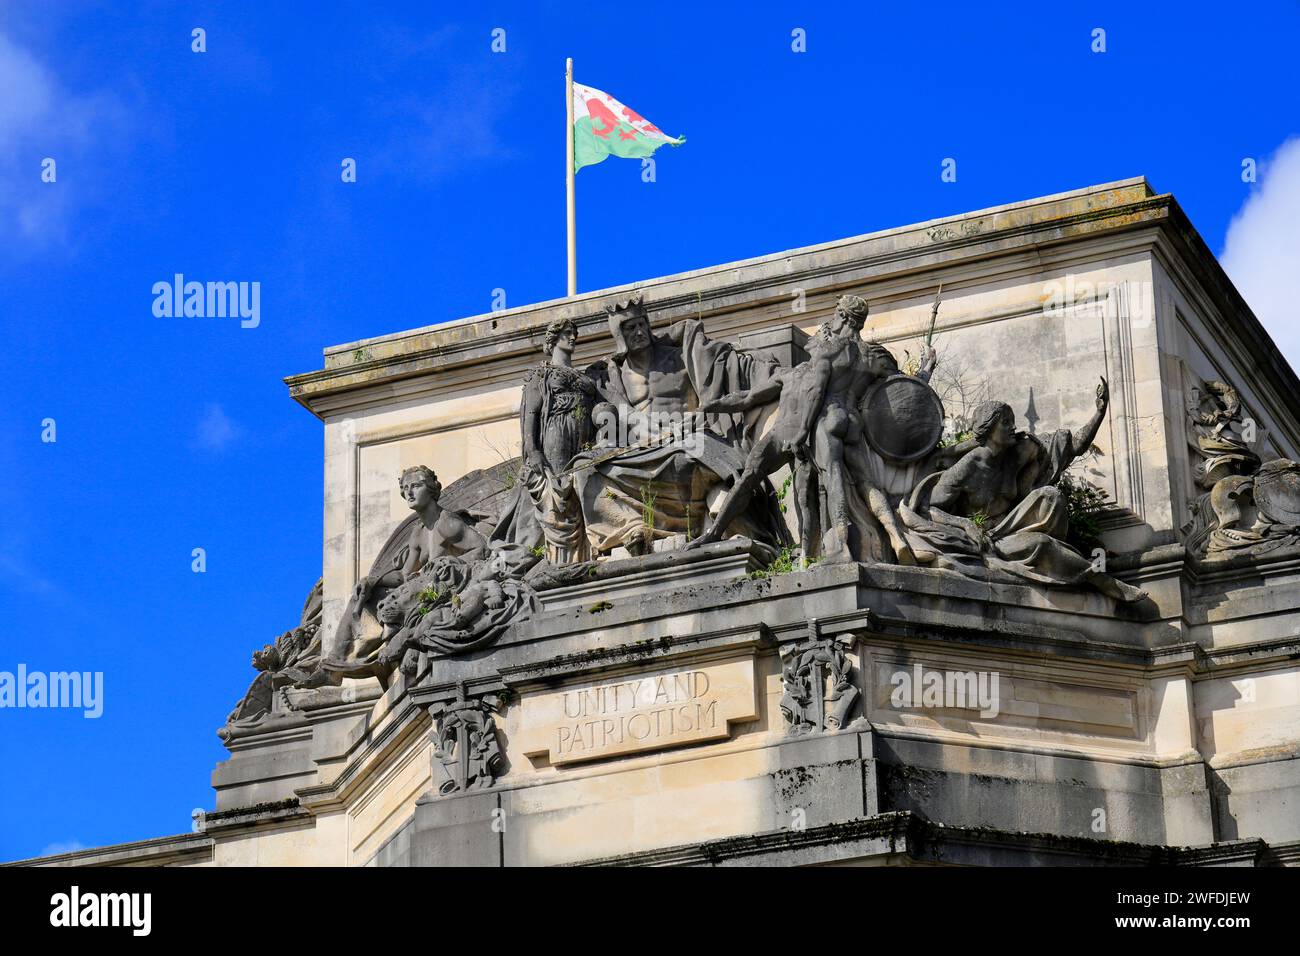 Unity and Patriotism, Sculpture, Cardiff City Hall, Cathays Park,  Cardiff, South Wales, UK. Stock Photo